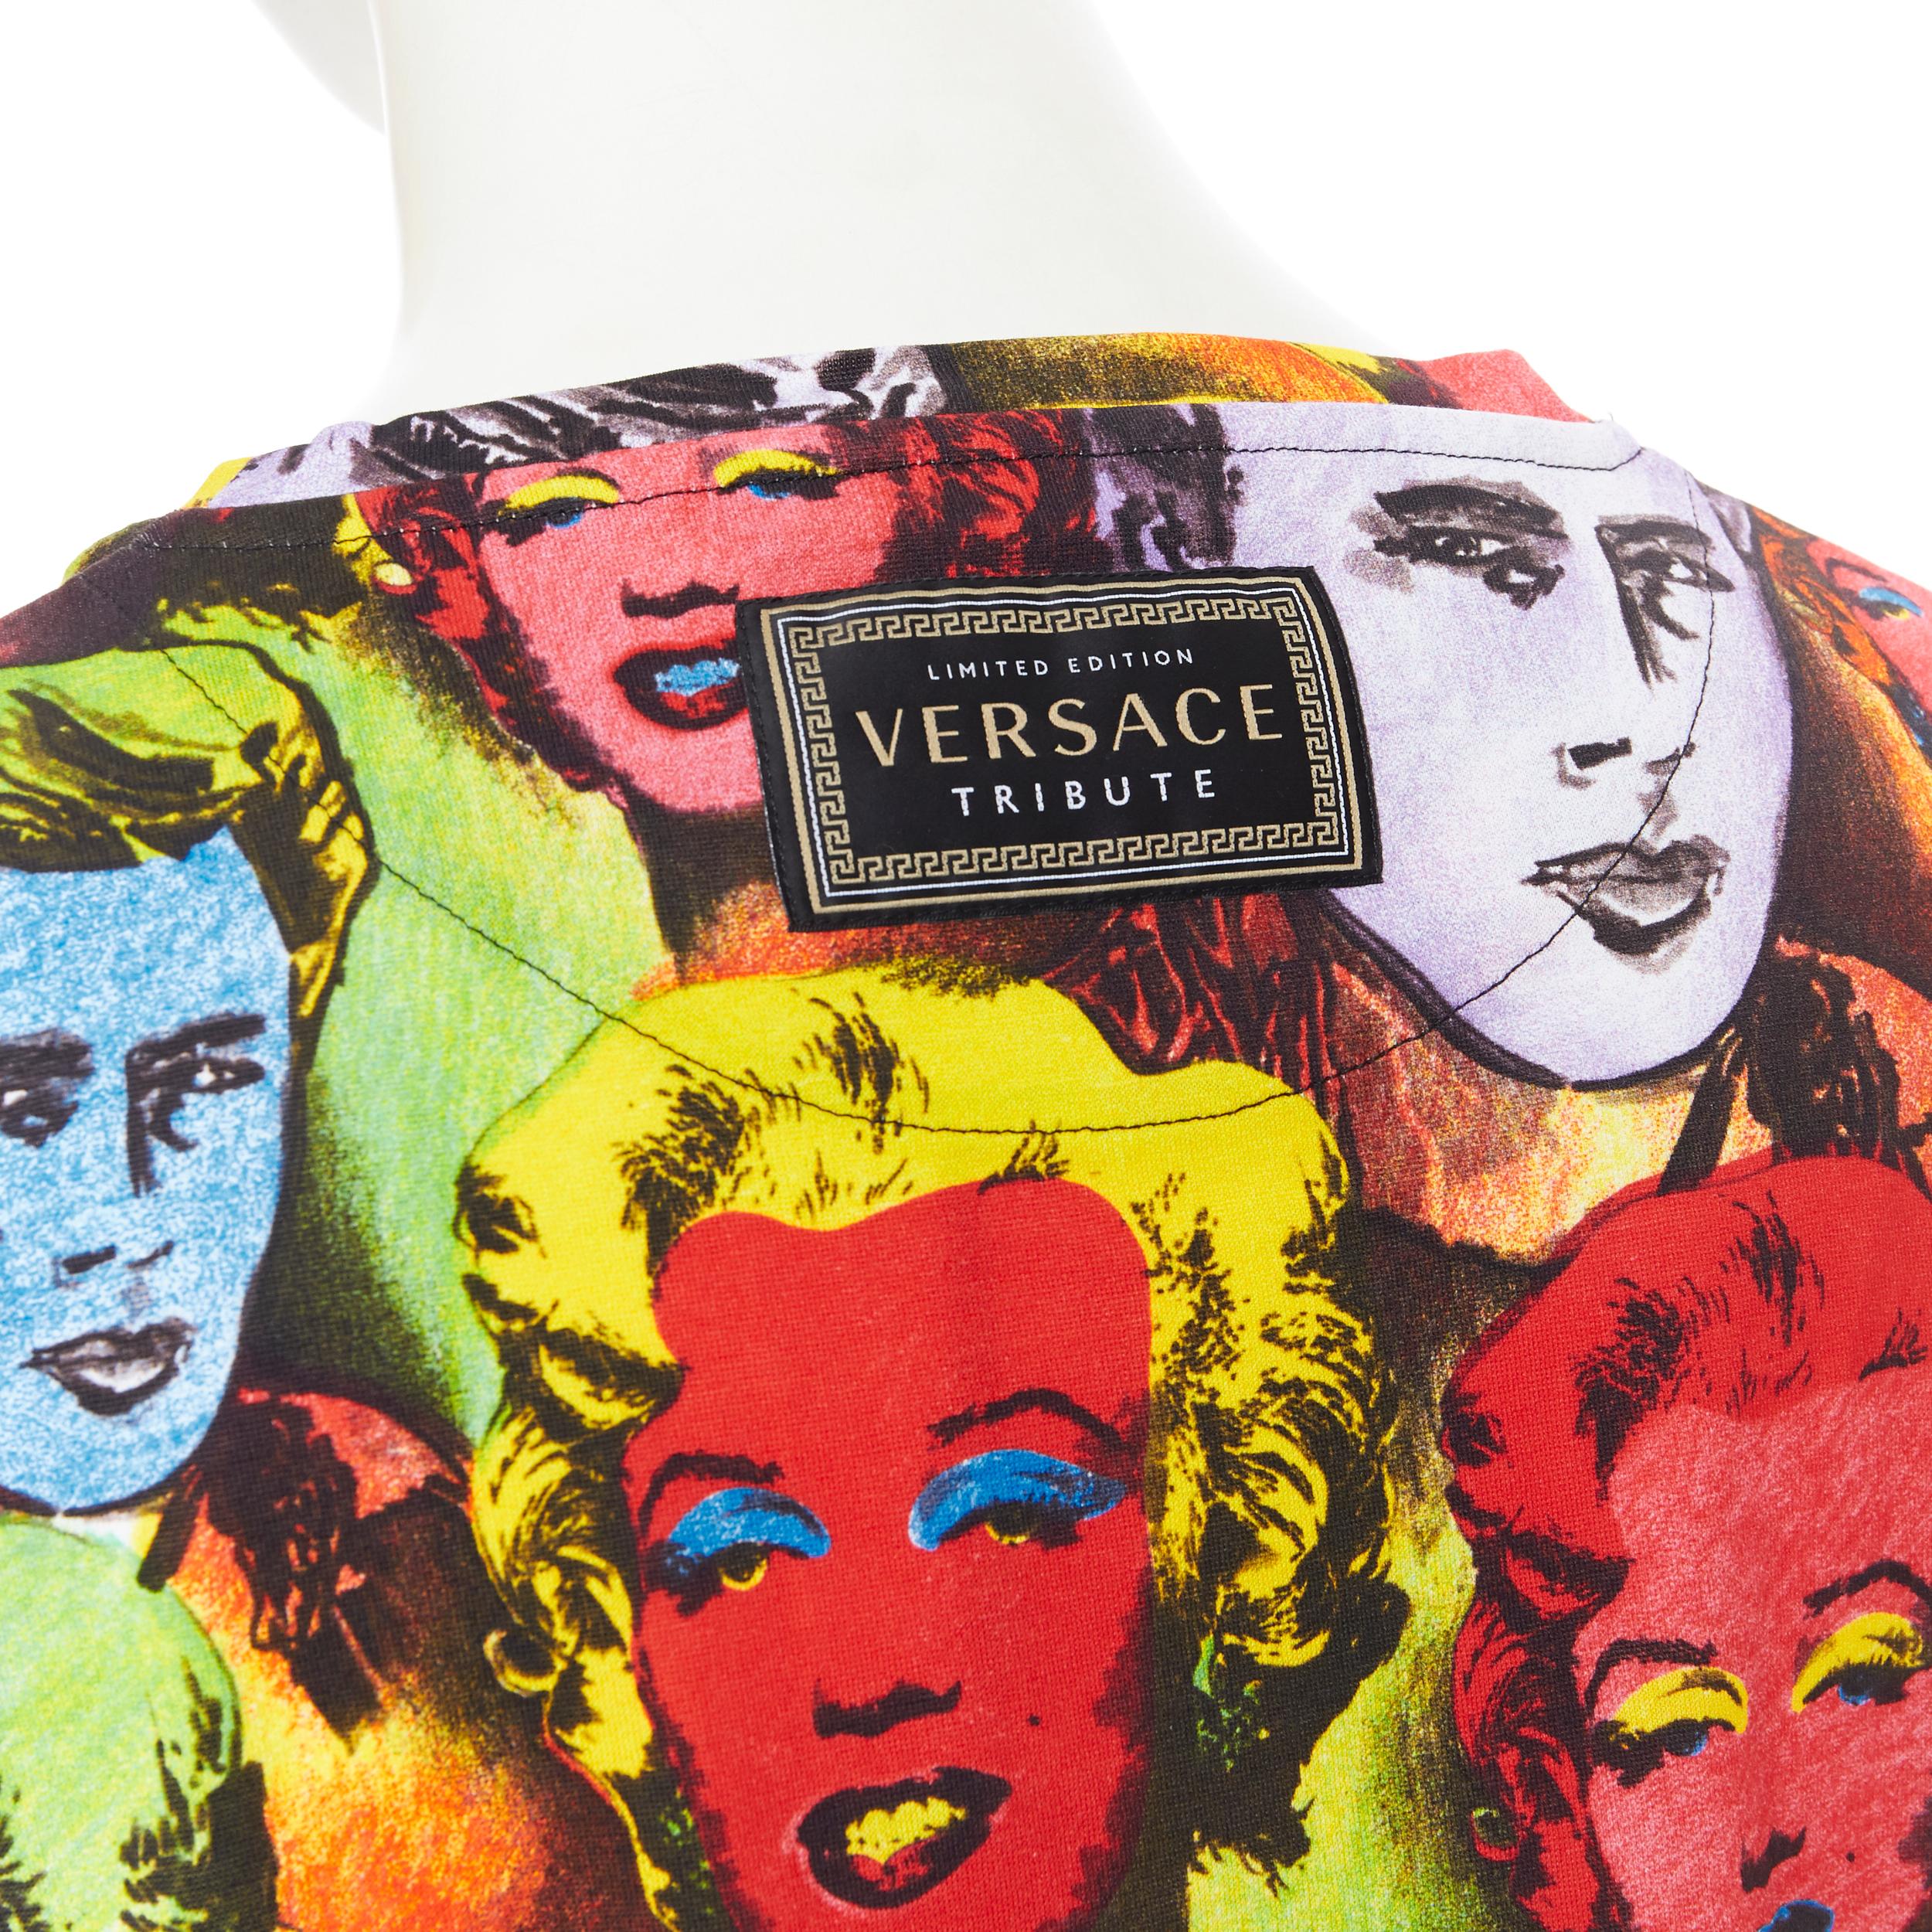 new VERSACE Limited Edition Tribute Warhol SS1991 crystal Monroe t-shirt M 2